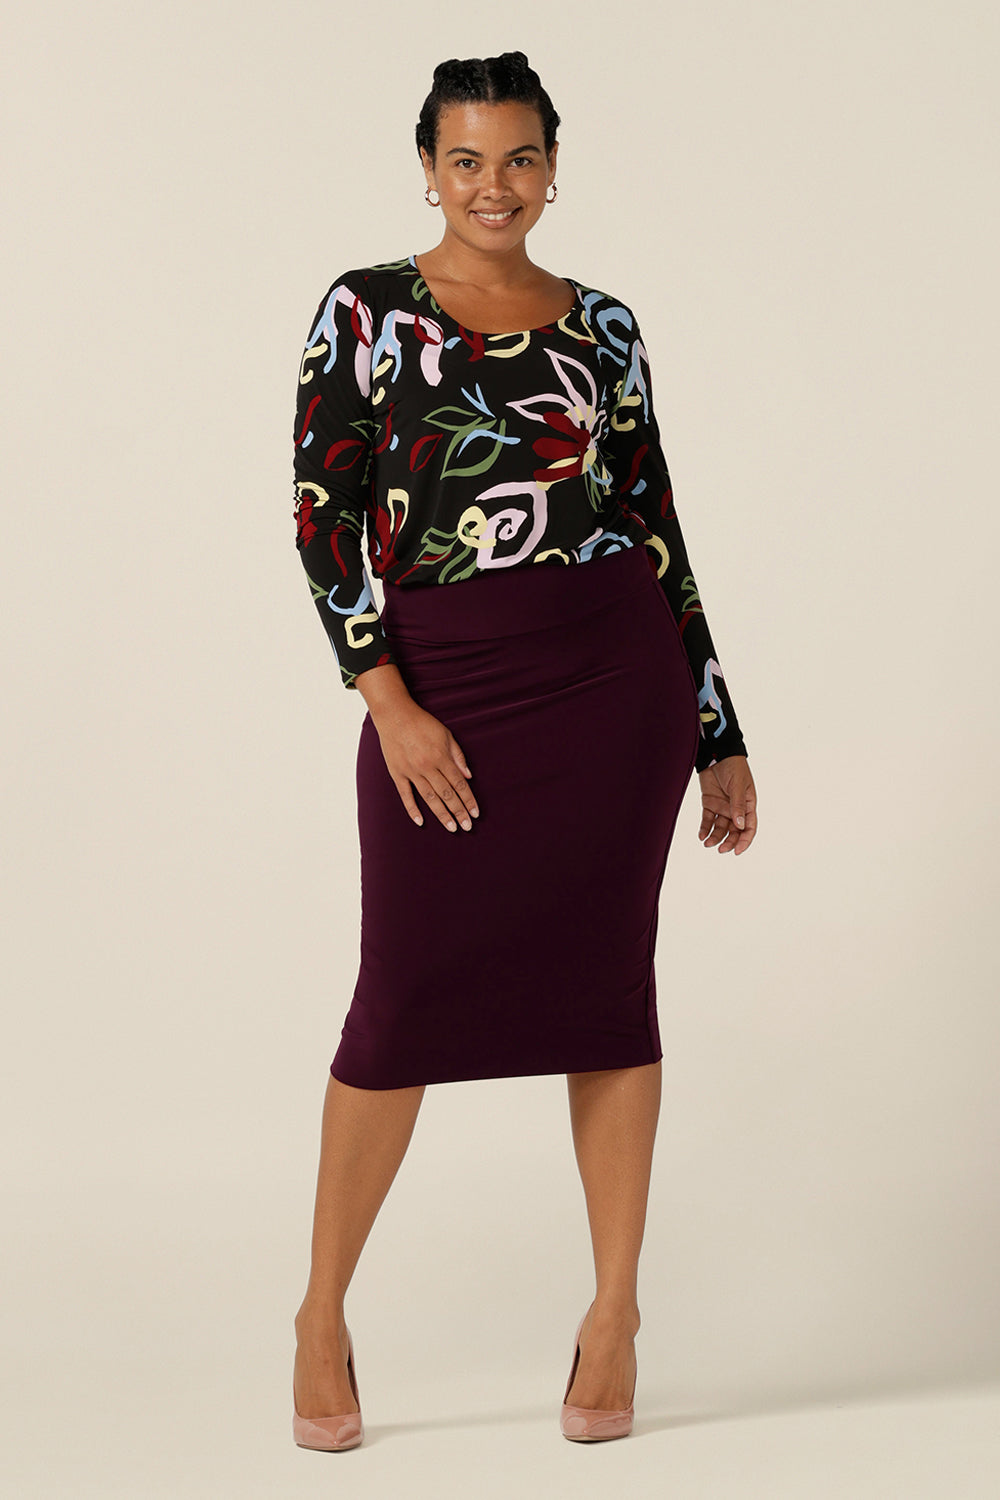 Styled for work, a round neck jersey top with abstract print and full length sleeves is worn tucked in to a workwear tube skirt in Mulberry. Shown worn by a size 12 woman, shop this work top in an inclusive size 8 to size 24 range. 